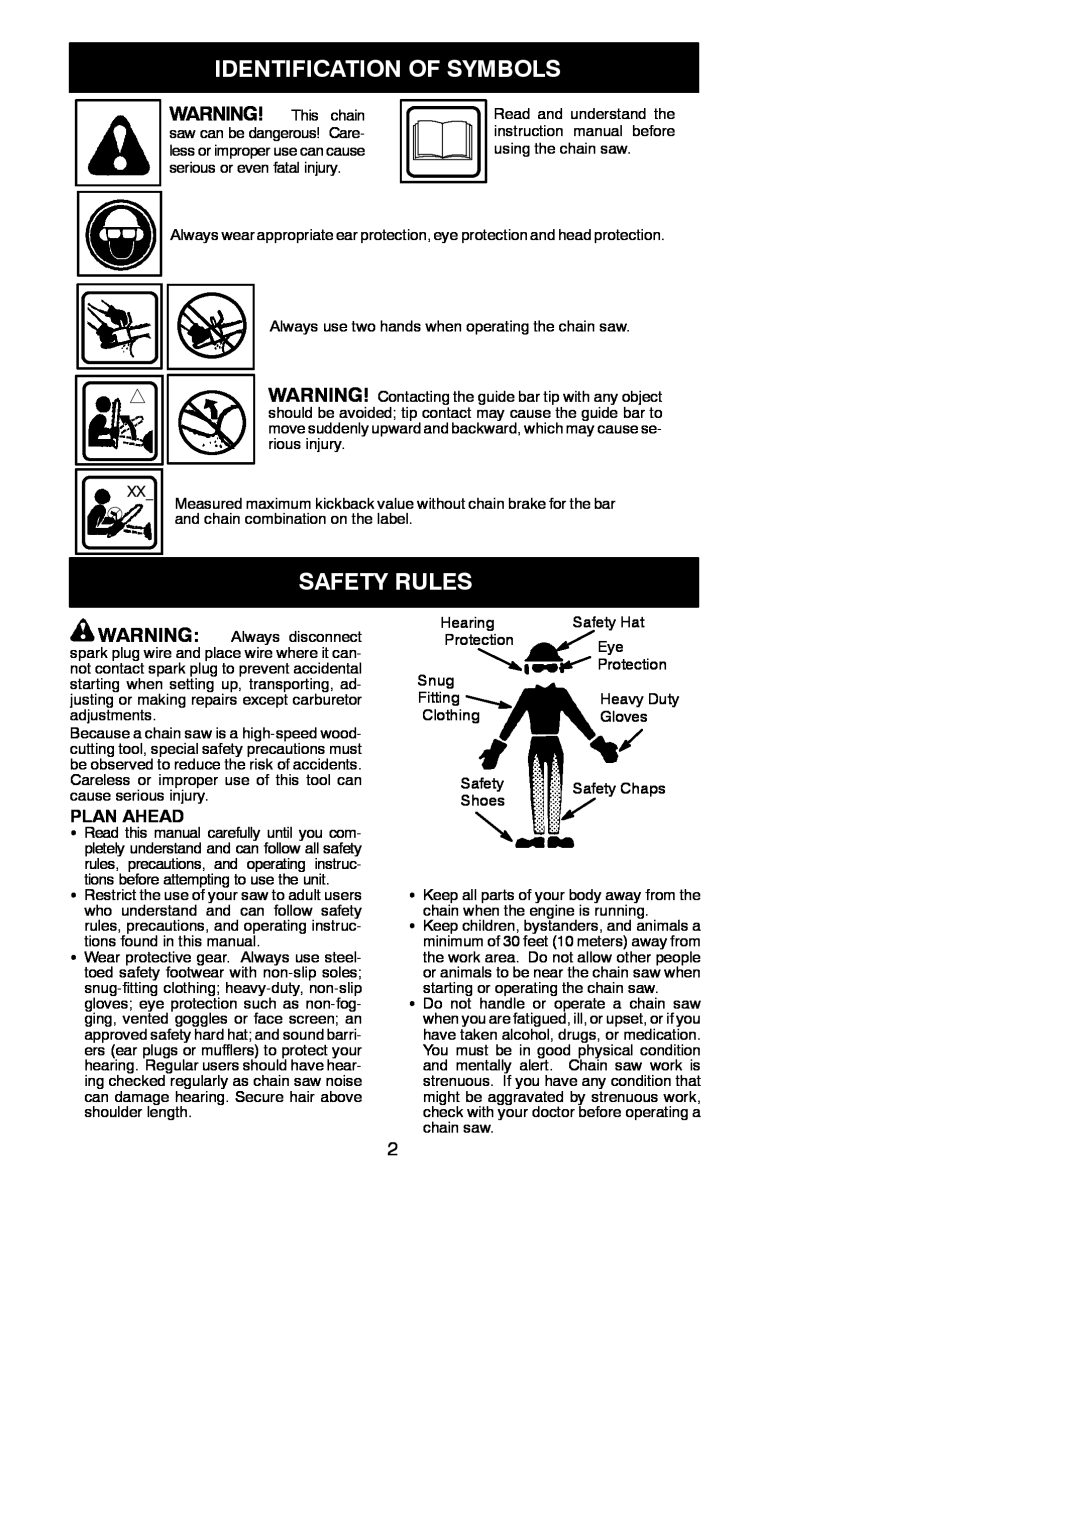 Poulan 530164817, 2004-06 instruction manual Identification Of Symbols, Safety Rules, Plan Ahead 